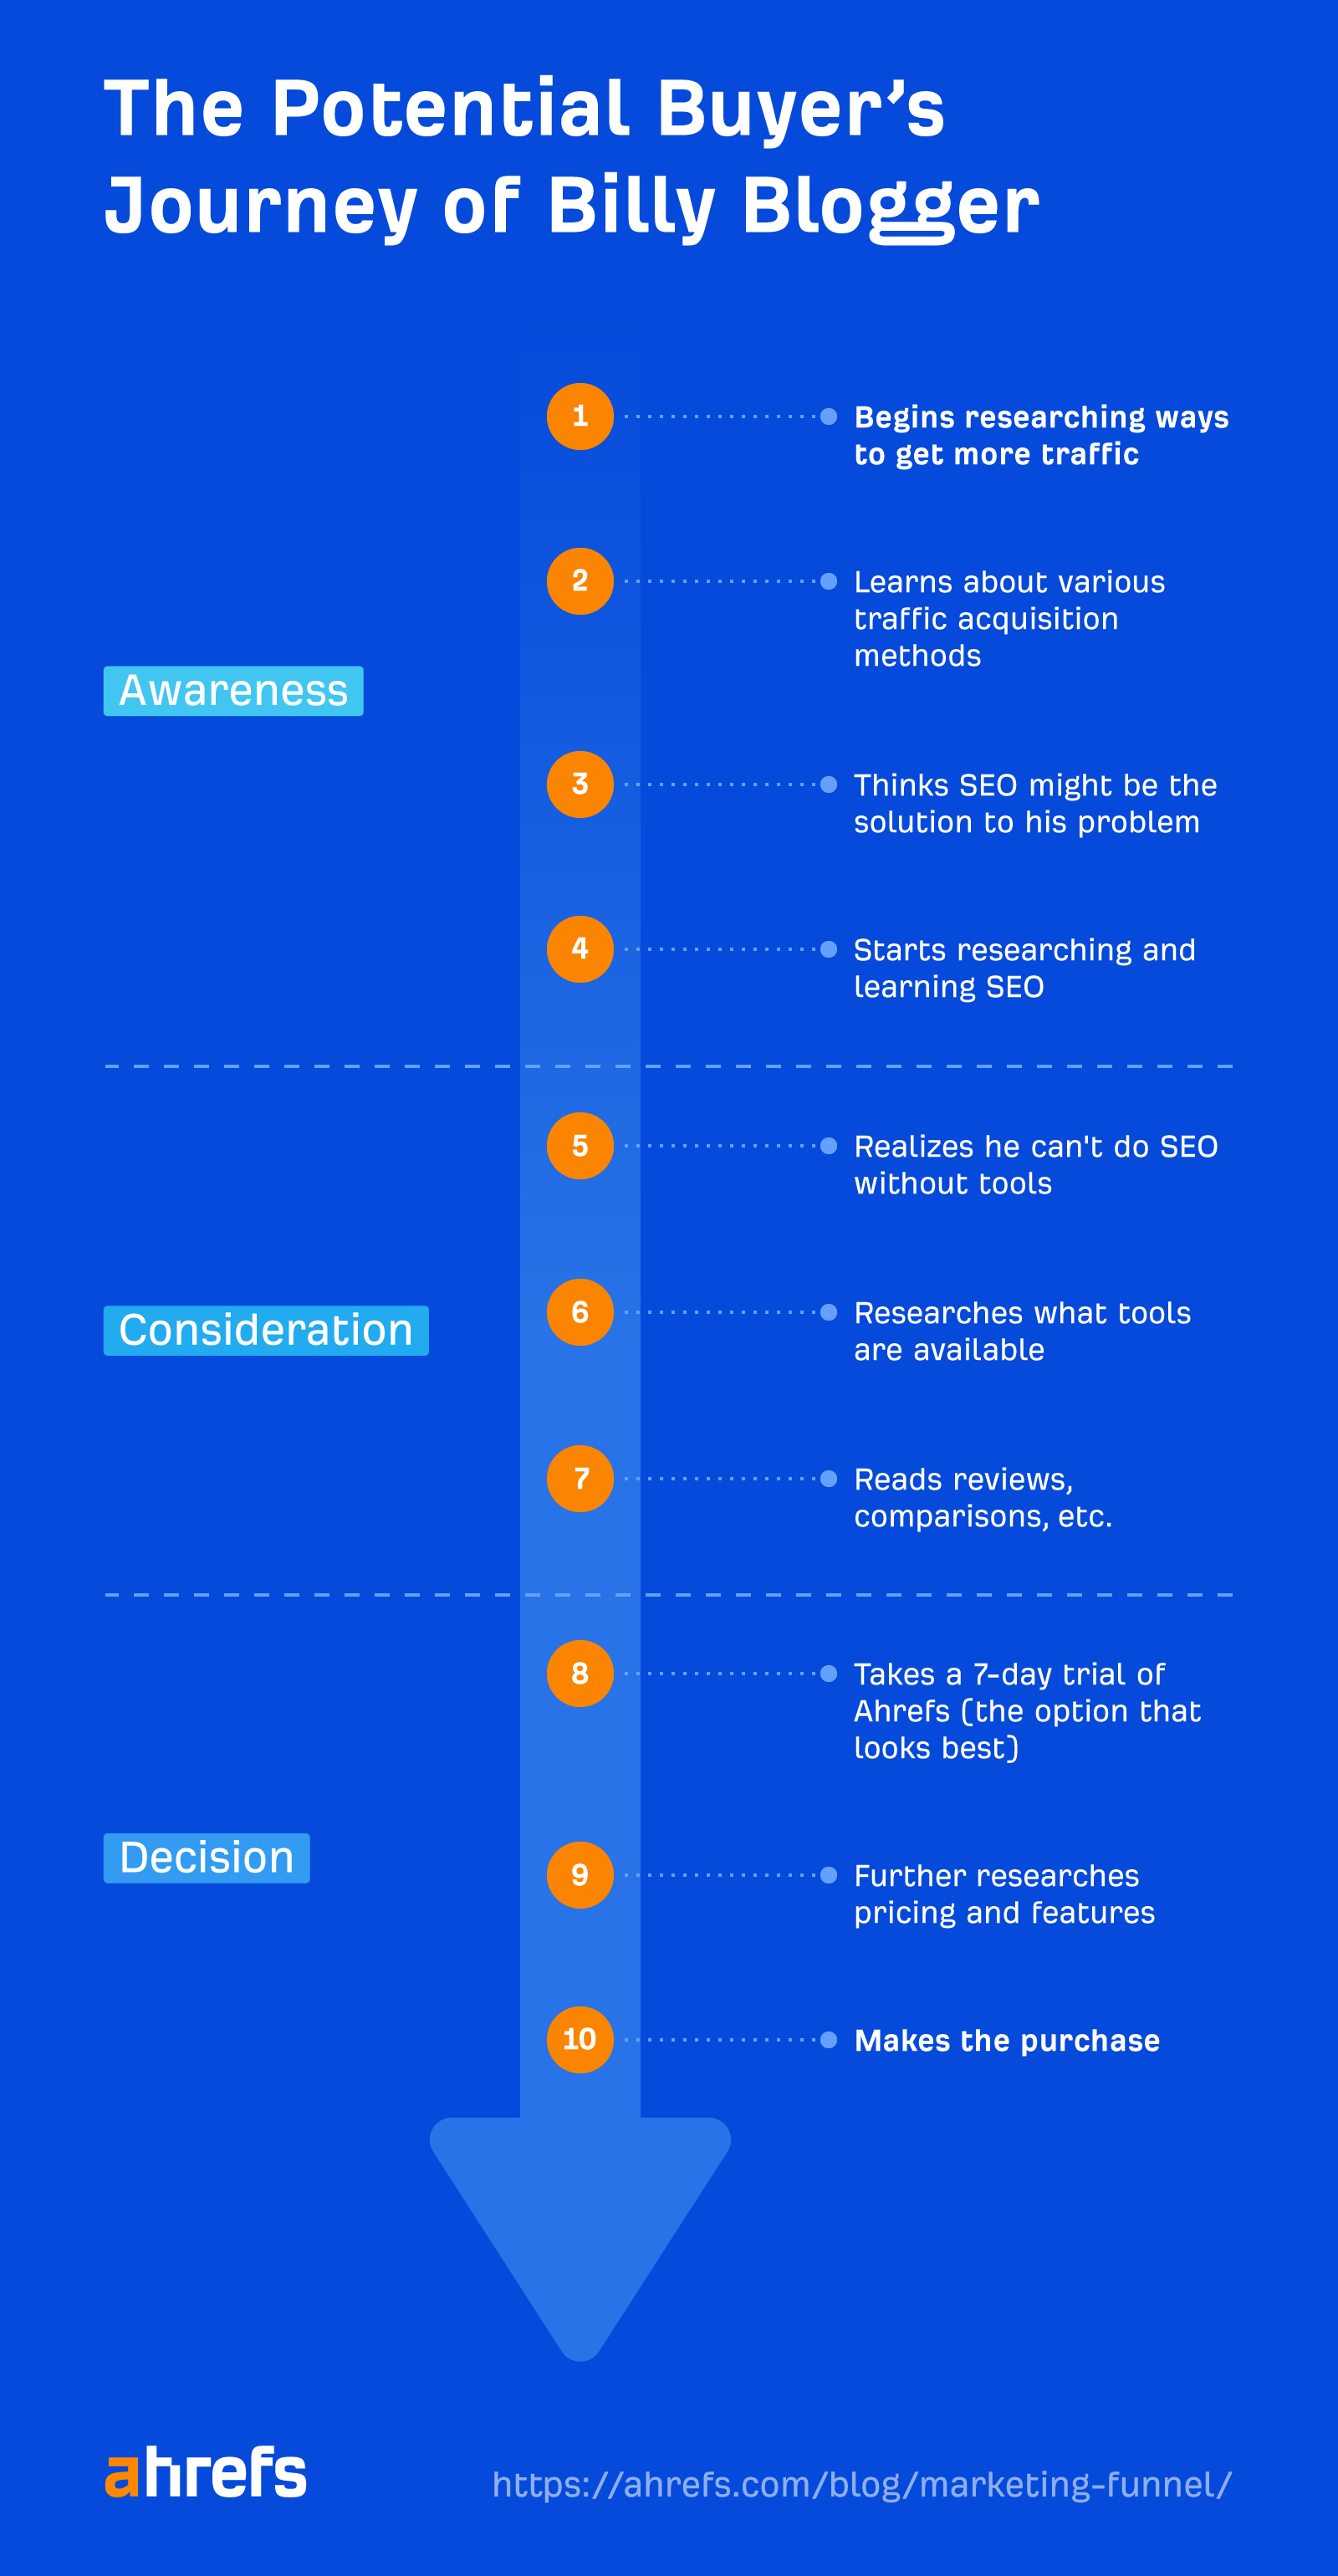 Potential buyer's journey of an Ahrefs customer